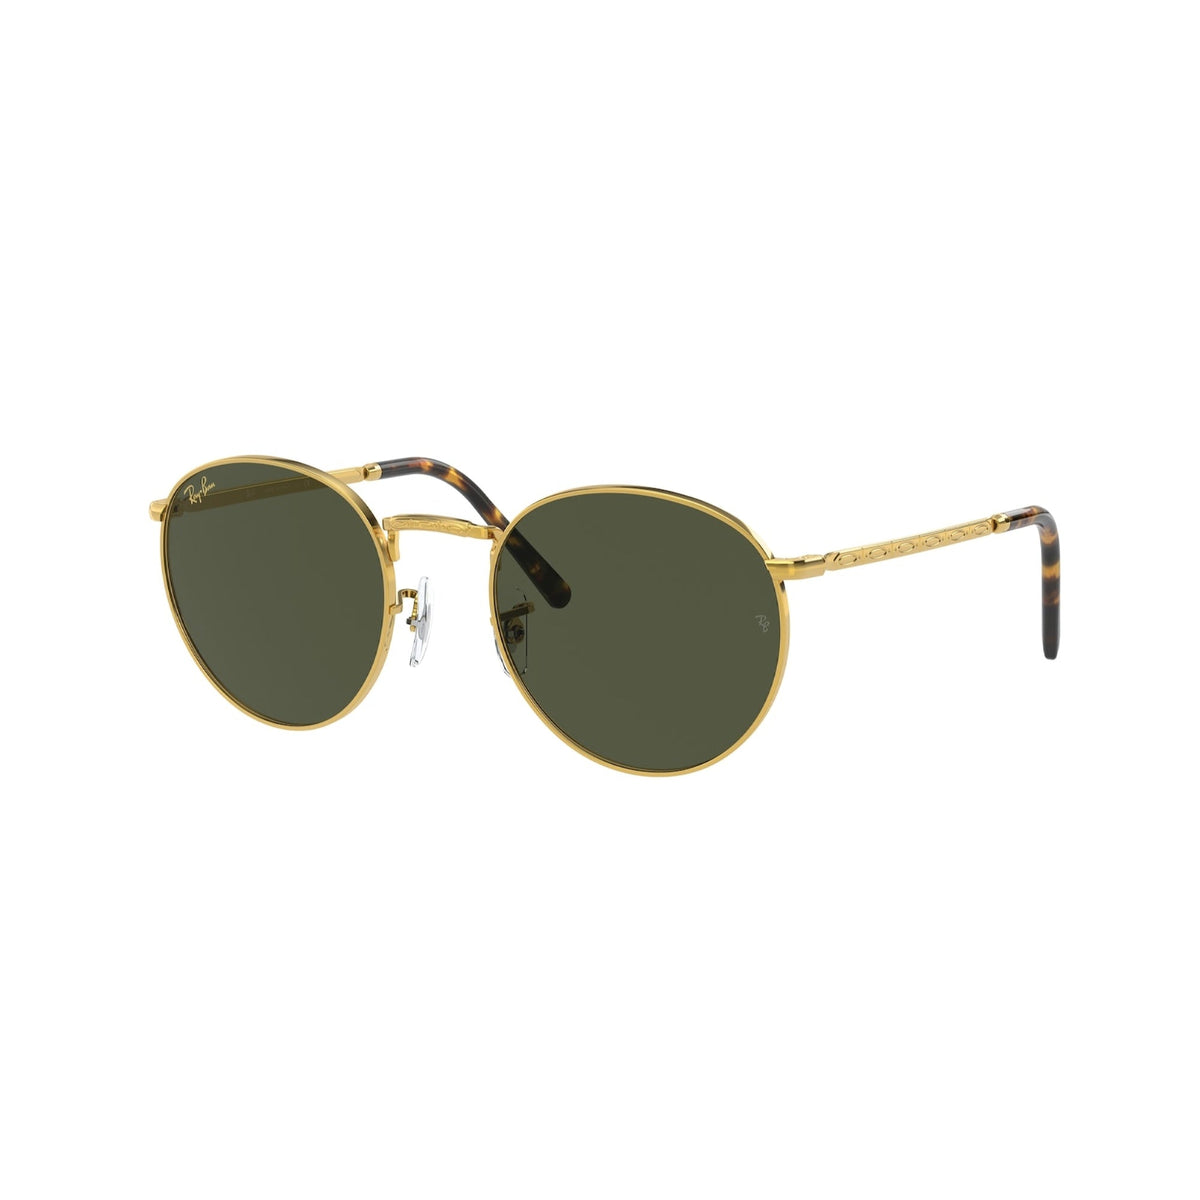 Ray-Ban Unisex Sunglasses New round Gold Green Metal Metal  0RB3637 919631 53